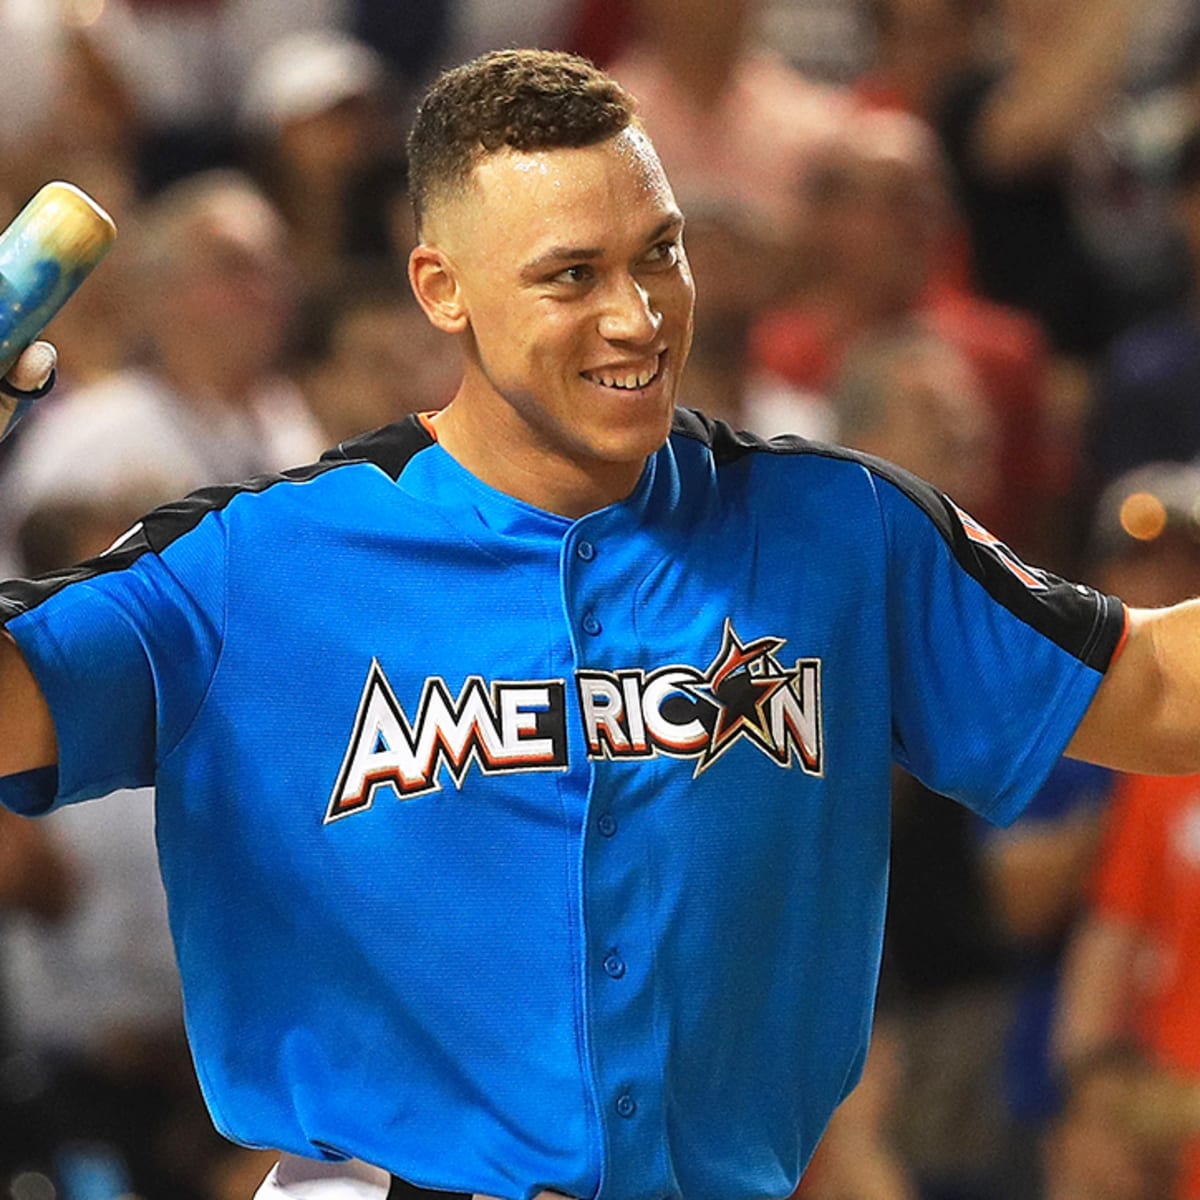 2017 Home Run Derby Results: Aaron Judge Smashes His Way to Win